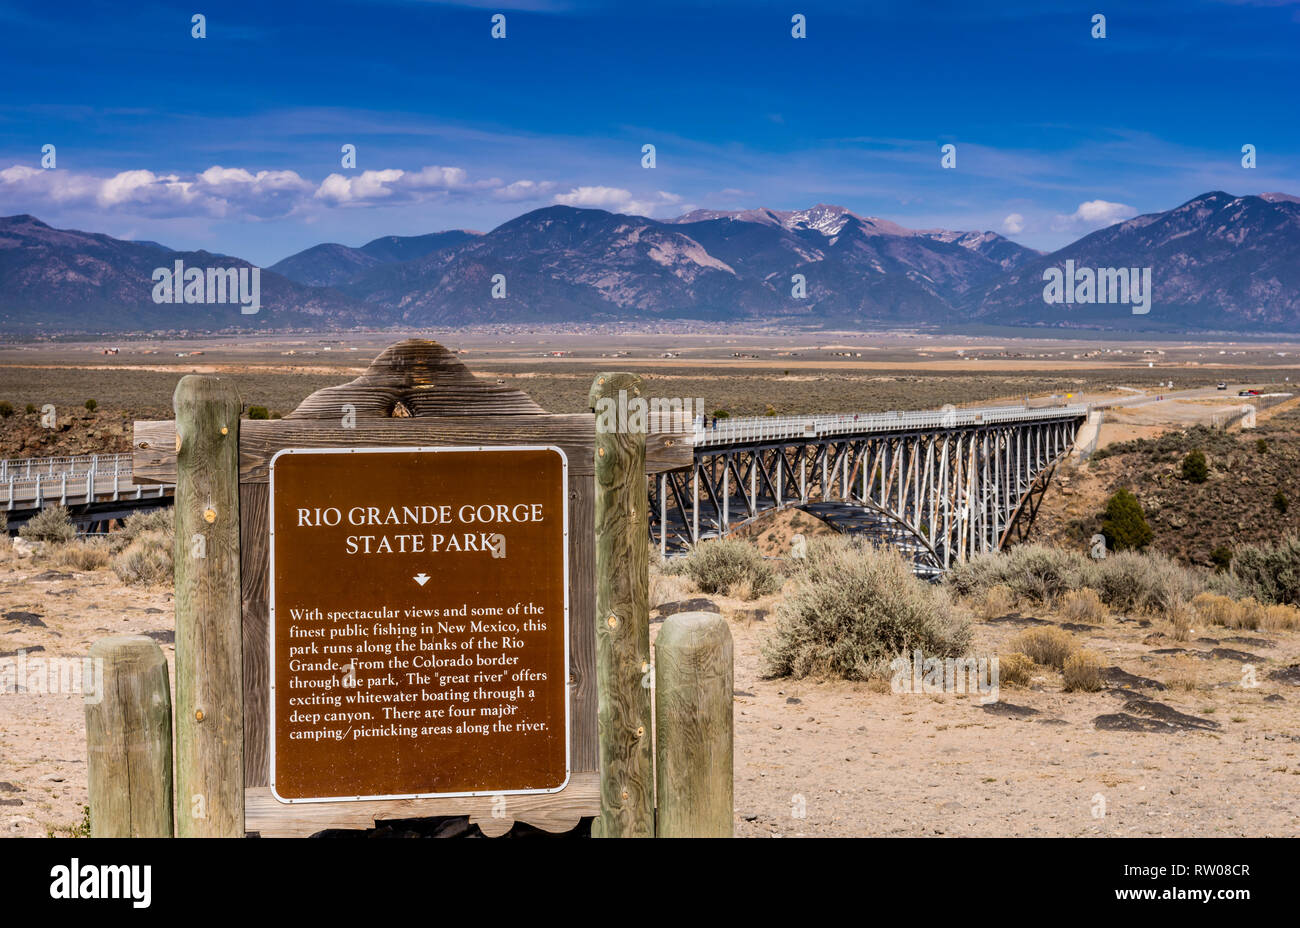 Rio Grande Gorge State Park High Resolution Stock Photography And Images Alamy